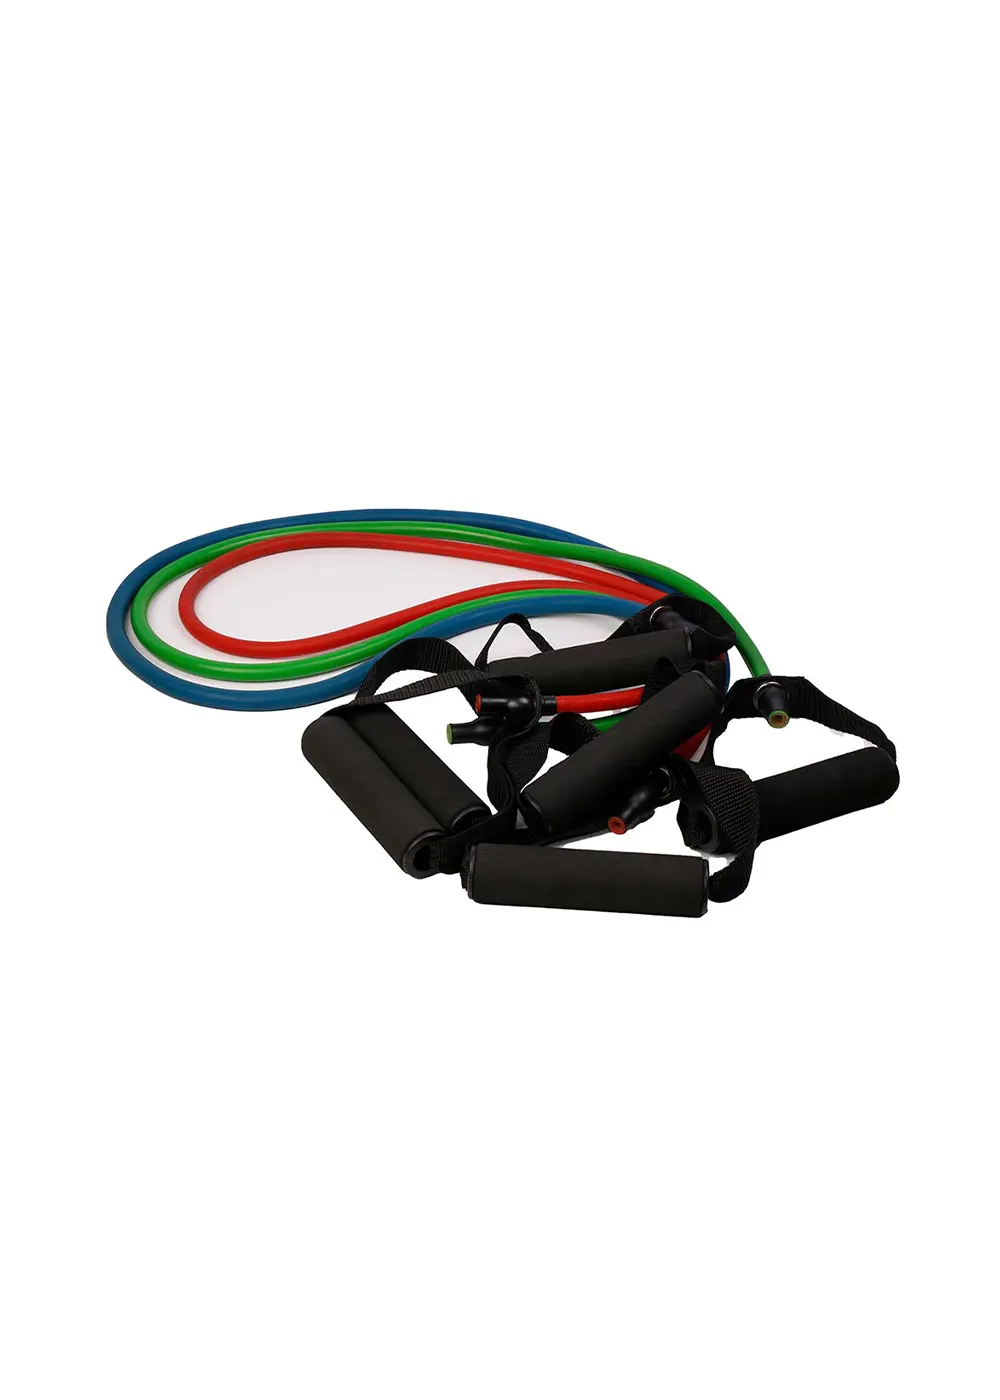 IRONBULL RESISTANCE BANDS